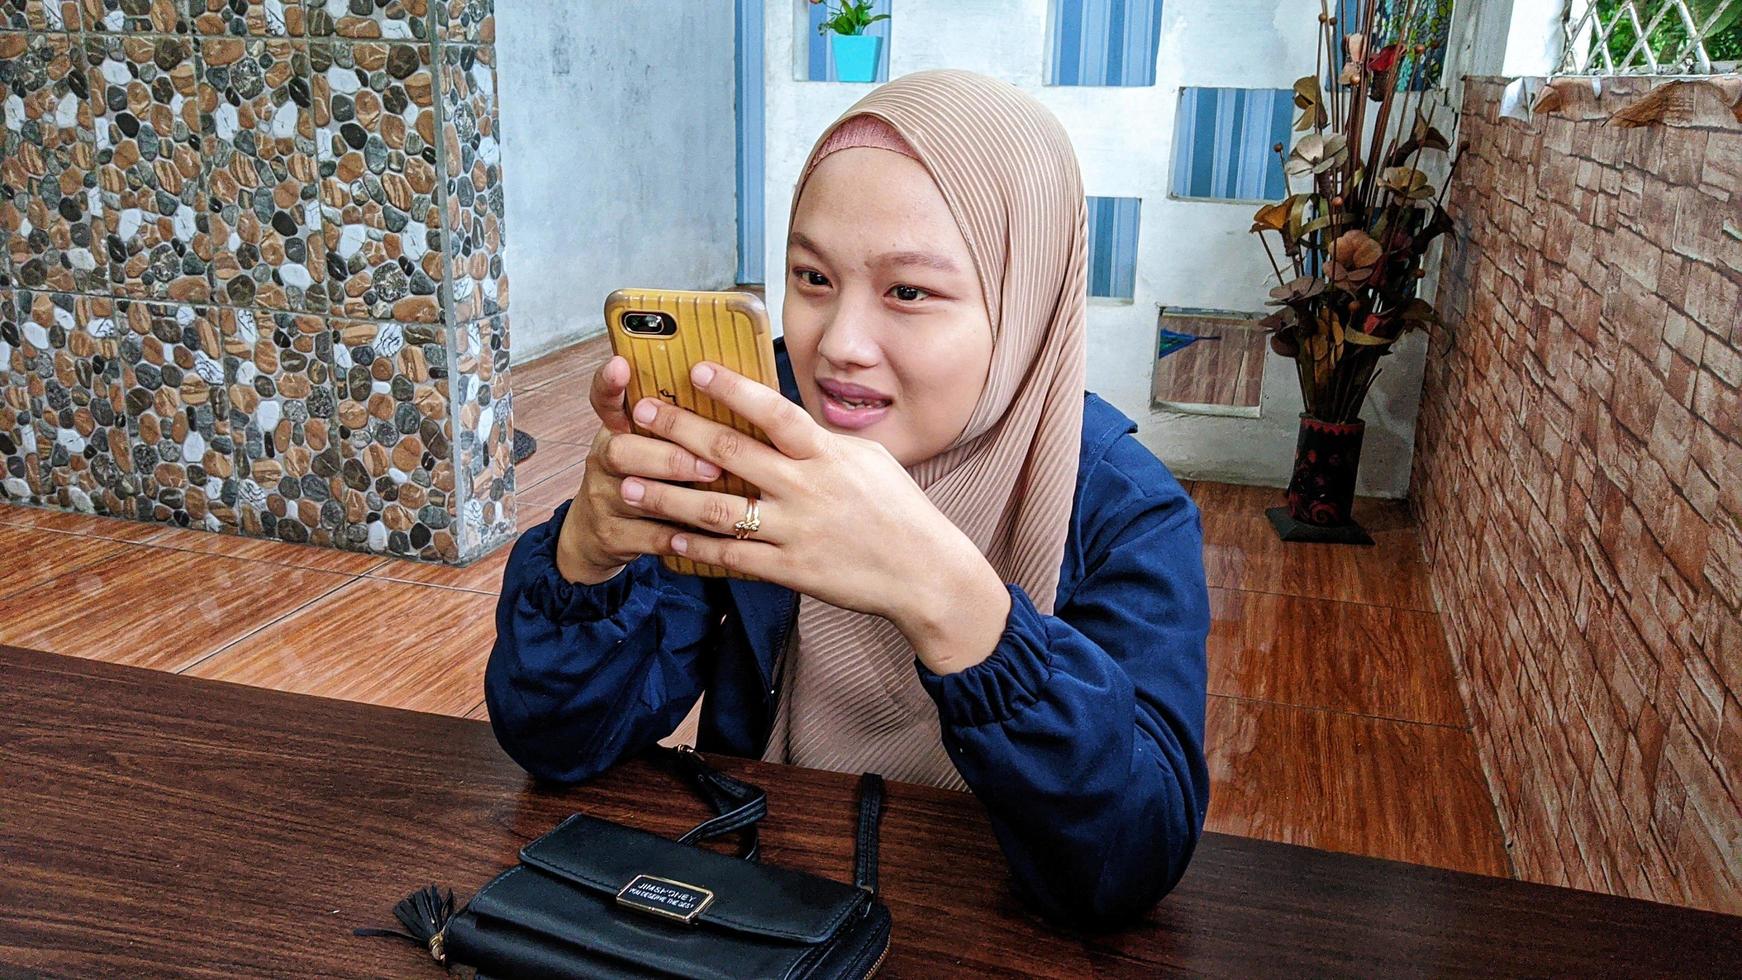 Cianjur Regency, West Java, Indonesia on April 7, 2022 - An Indonesian Muslim woman wearing a hijab is holding a smartphone. photo